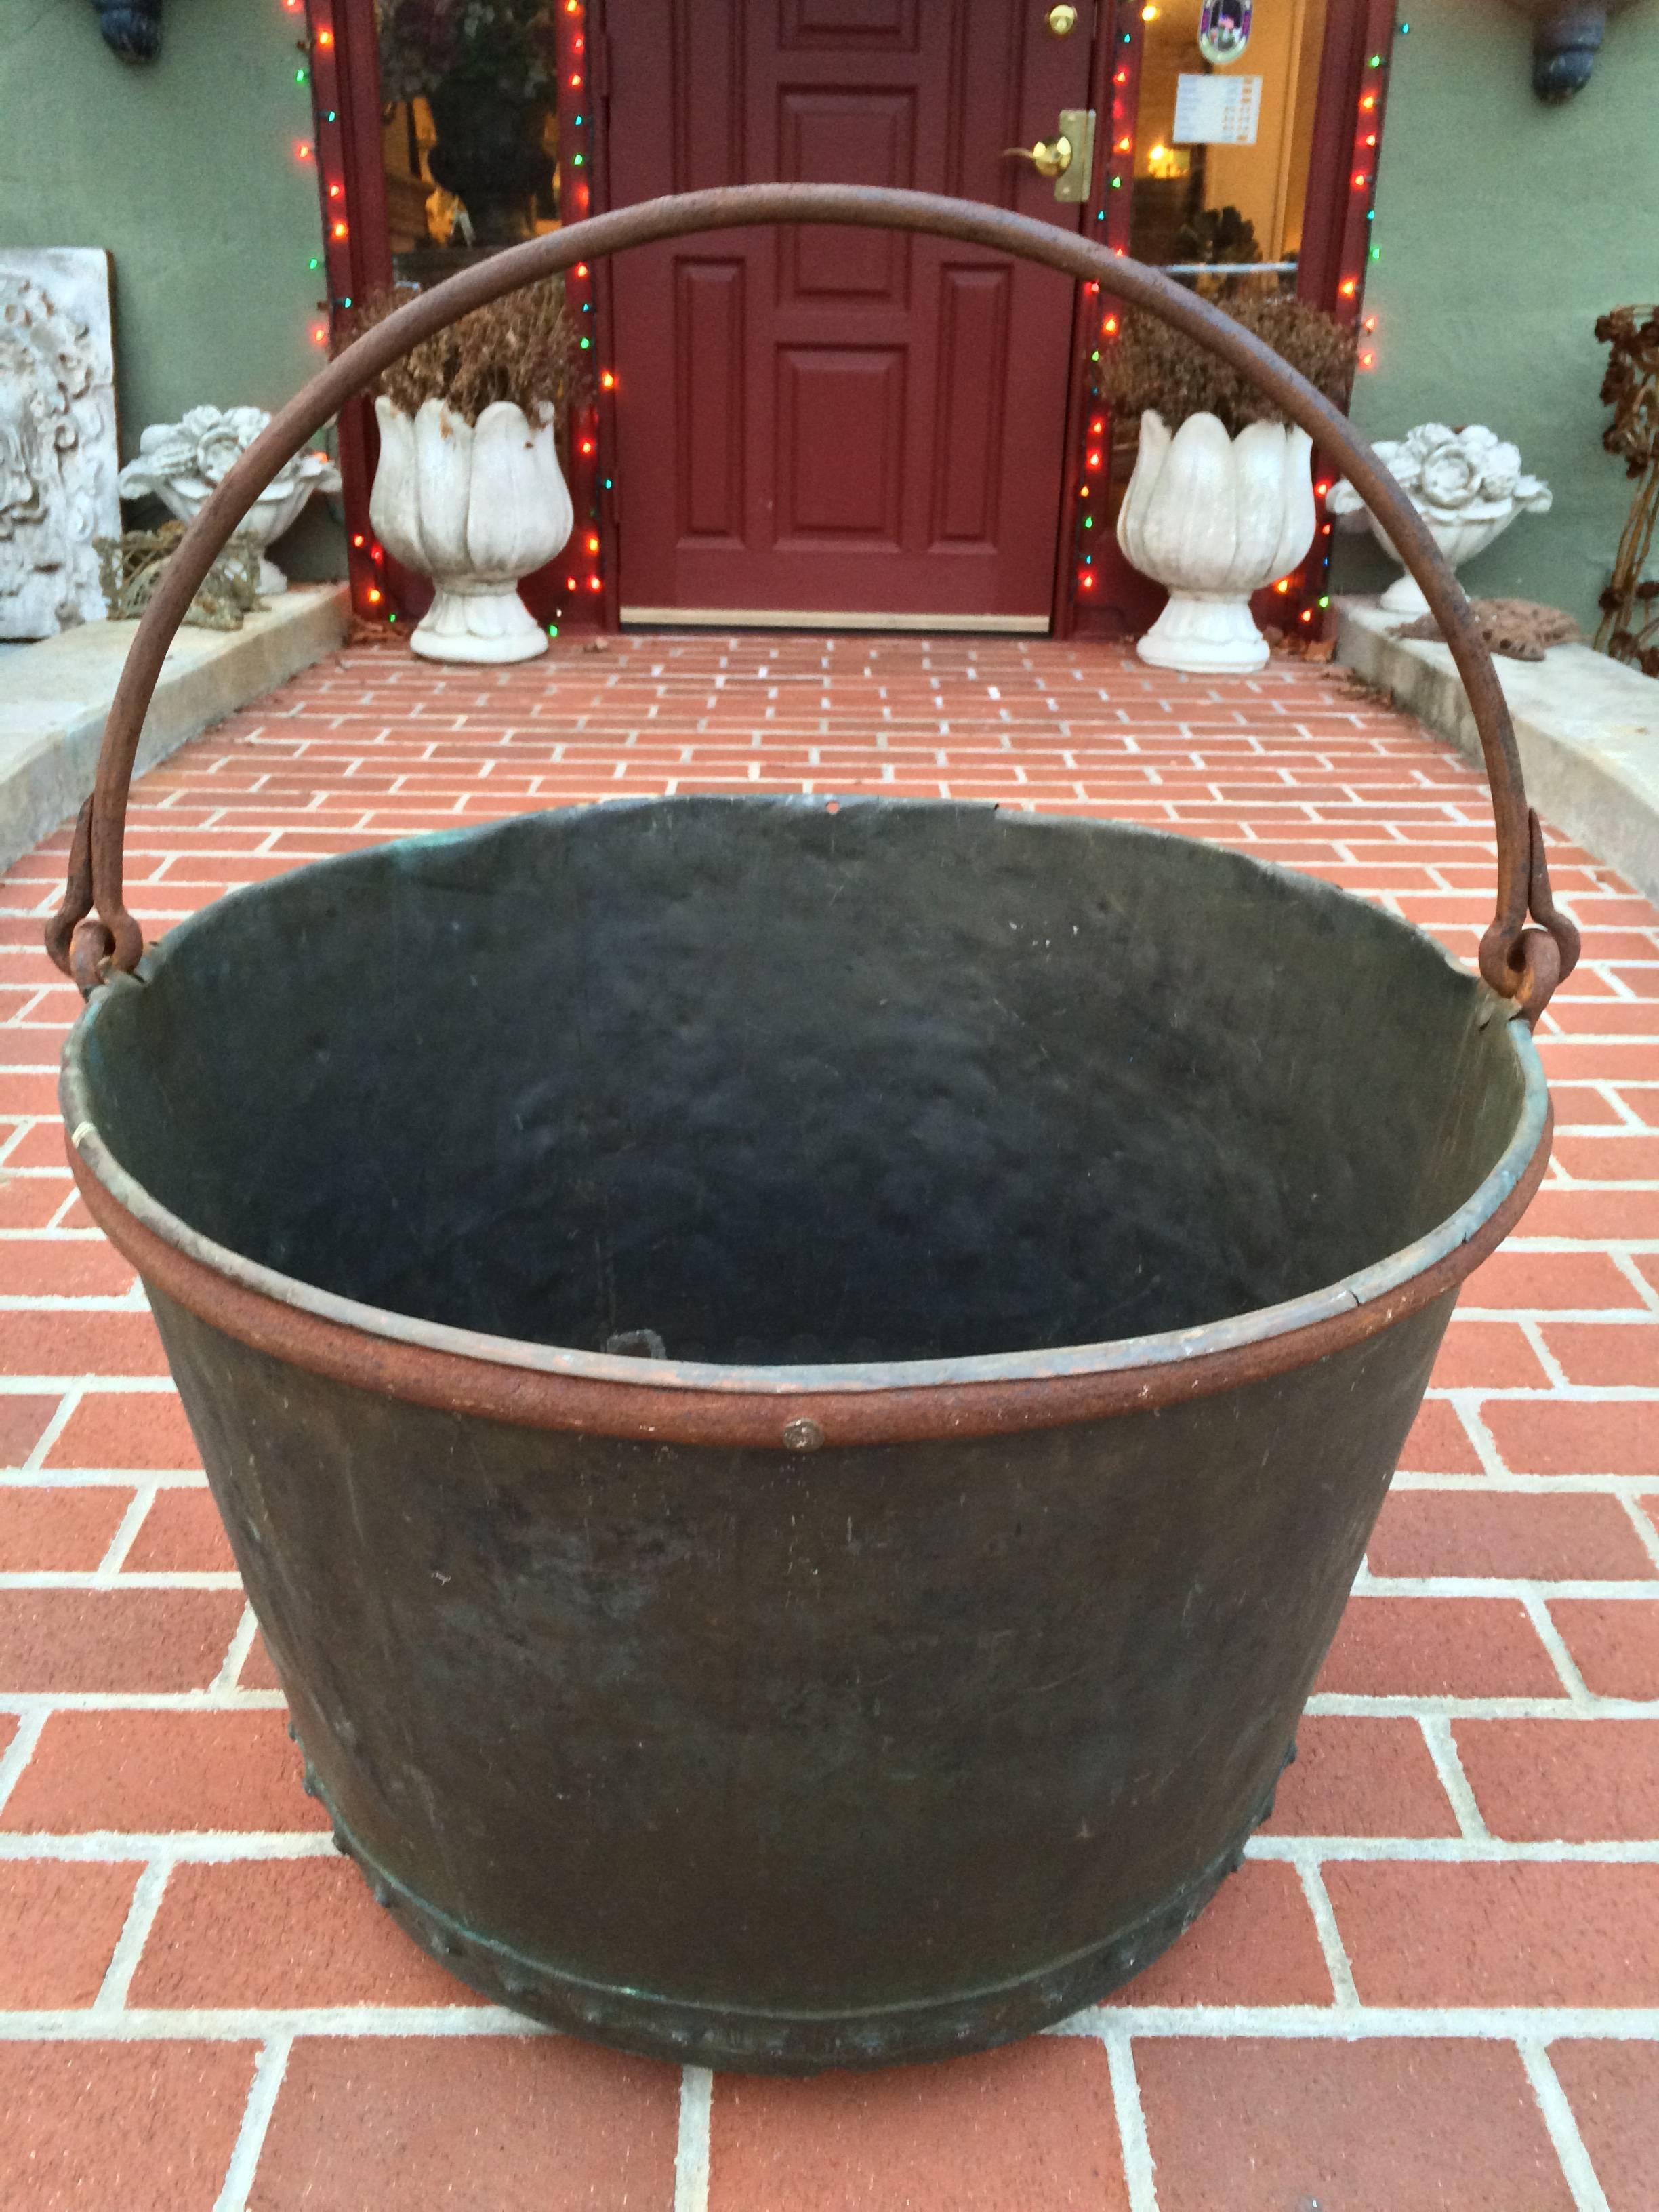 A large early 19th century riveted copper apple butter cauldron with forged iron handle. Lovely aged blue-green patina. One old repair as shown. Base is 19